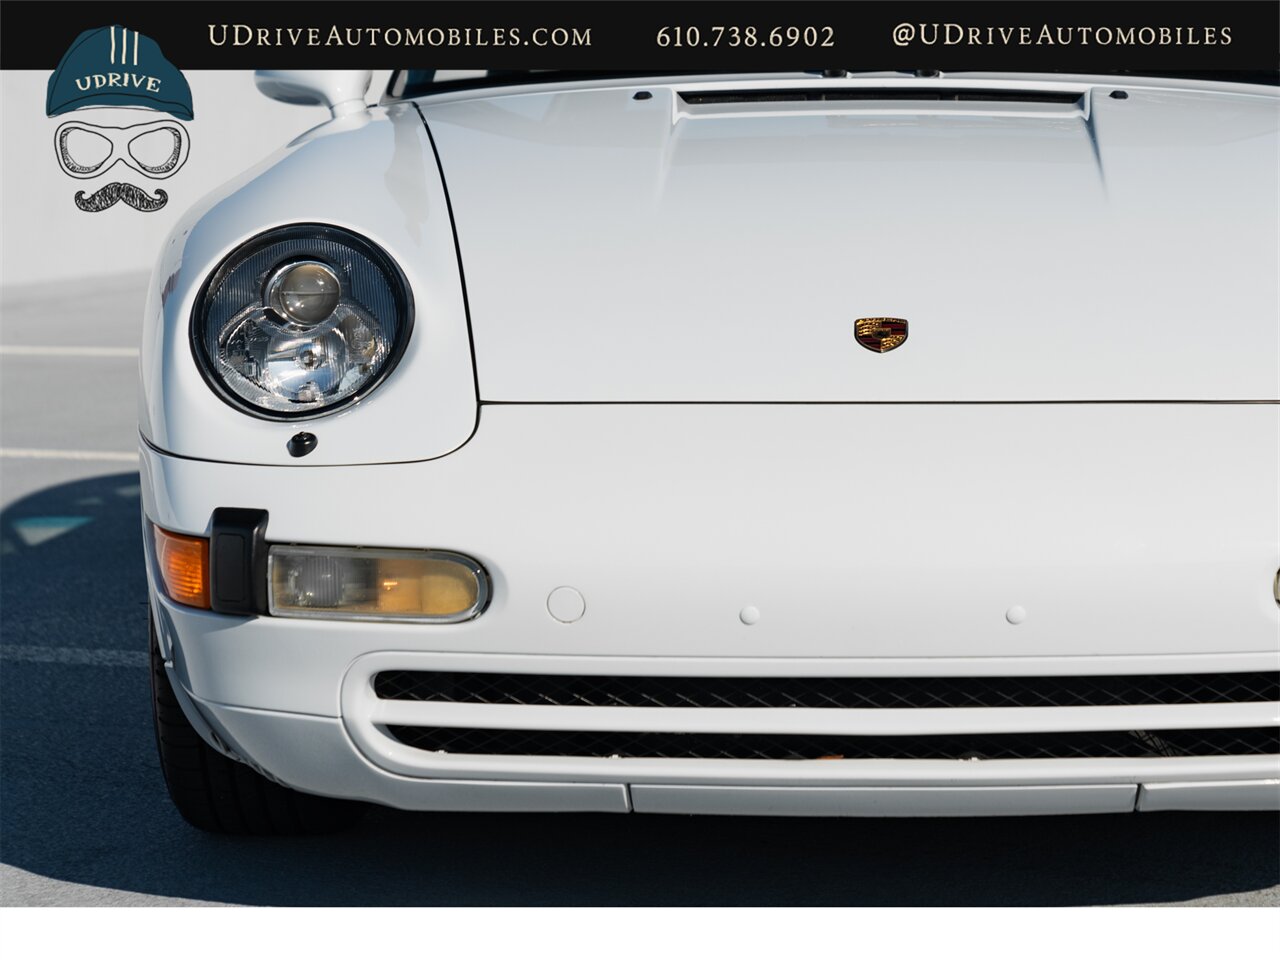 1998 Porsche 911 Carrera 993 Targa  1 of 122 Produced 6 Speed $10k Recent Service Engine Reseal - Photo 14 - West Chester, PA 19382